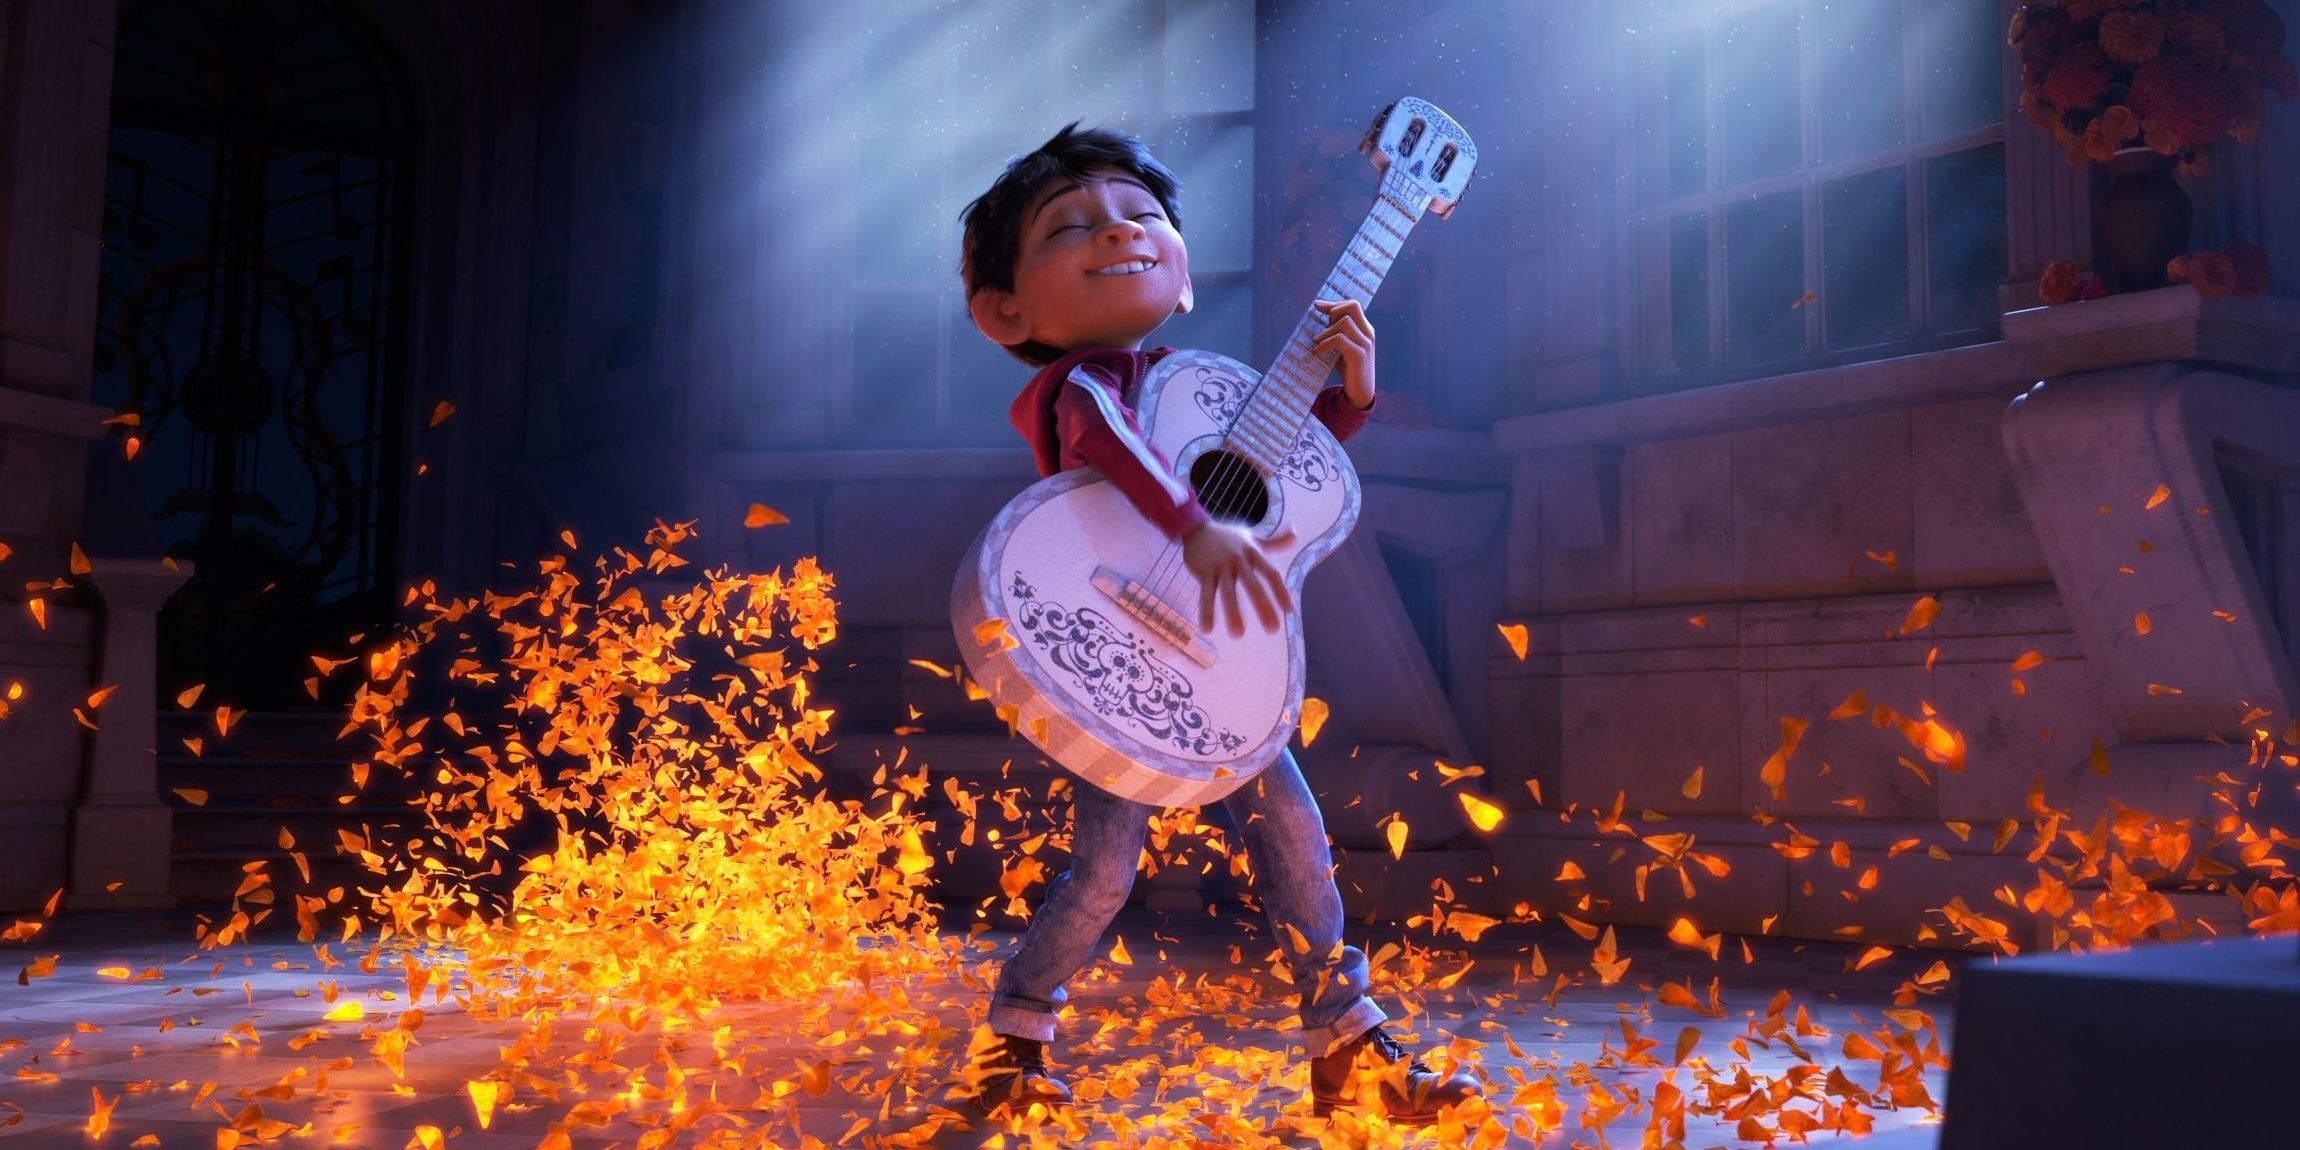 Miguel strums the guitar strings as leaves rise around him in Coco.